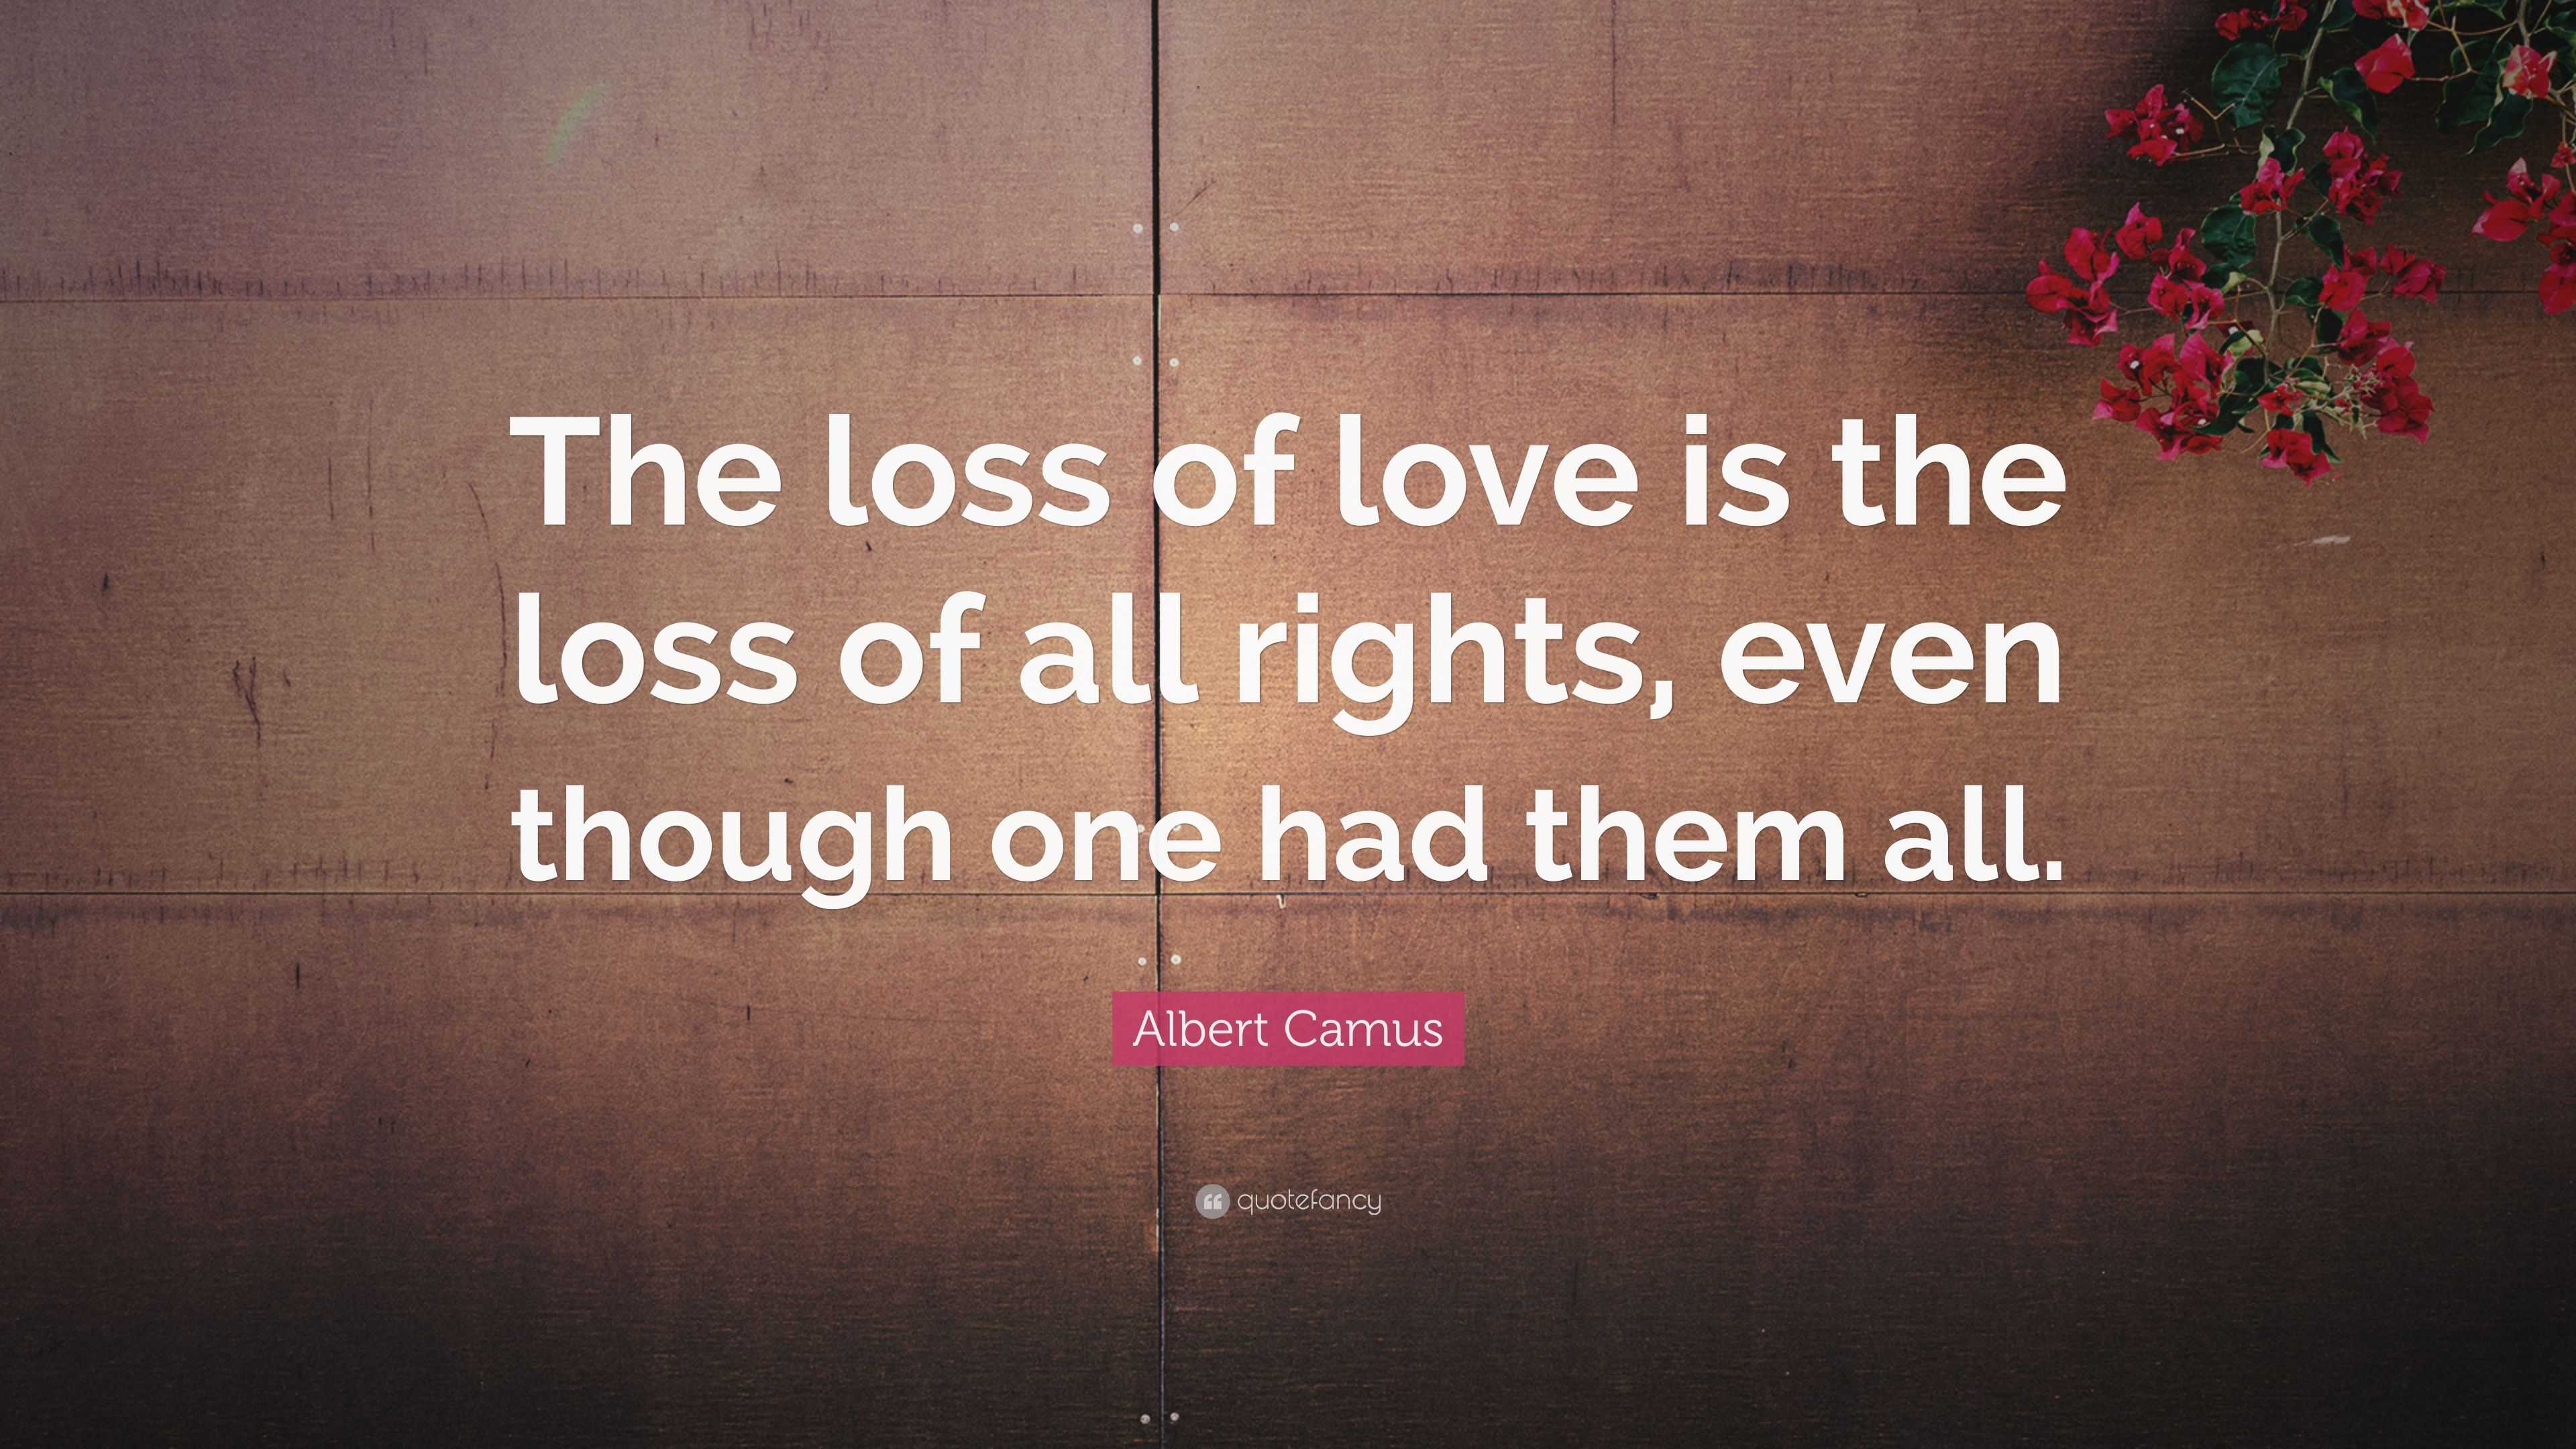 Albert Camus Quote: “The loss of love is the loss of all rights, even ...